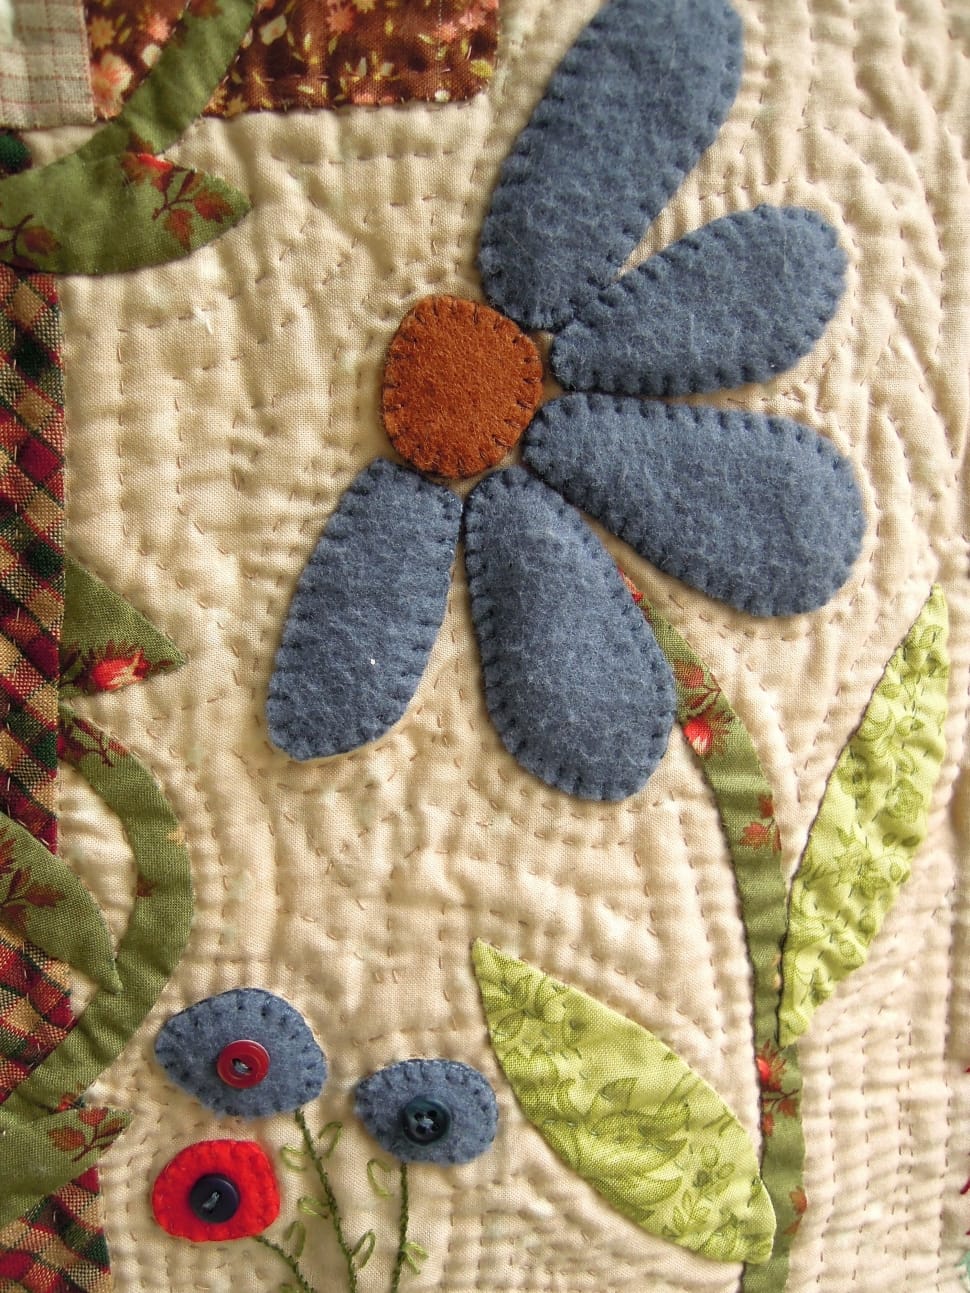 Fabric Flower, Sewing, Patchwork, Work, wool, art and craft preview